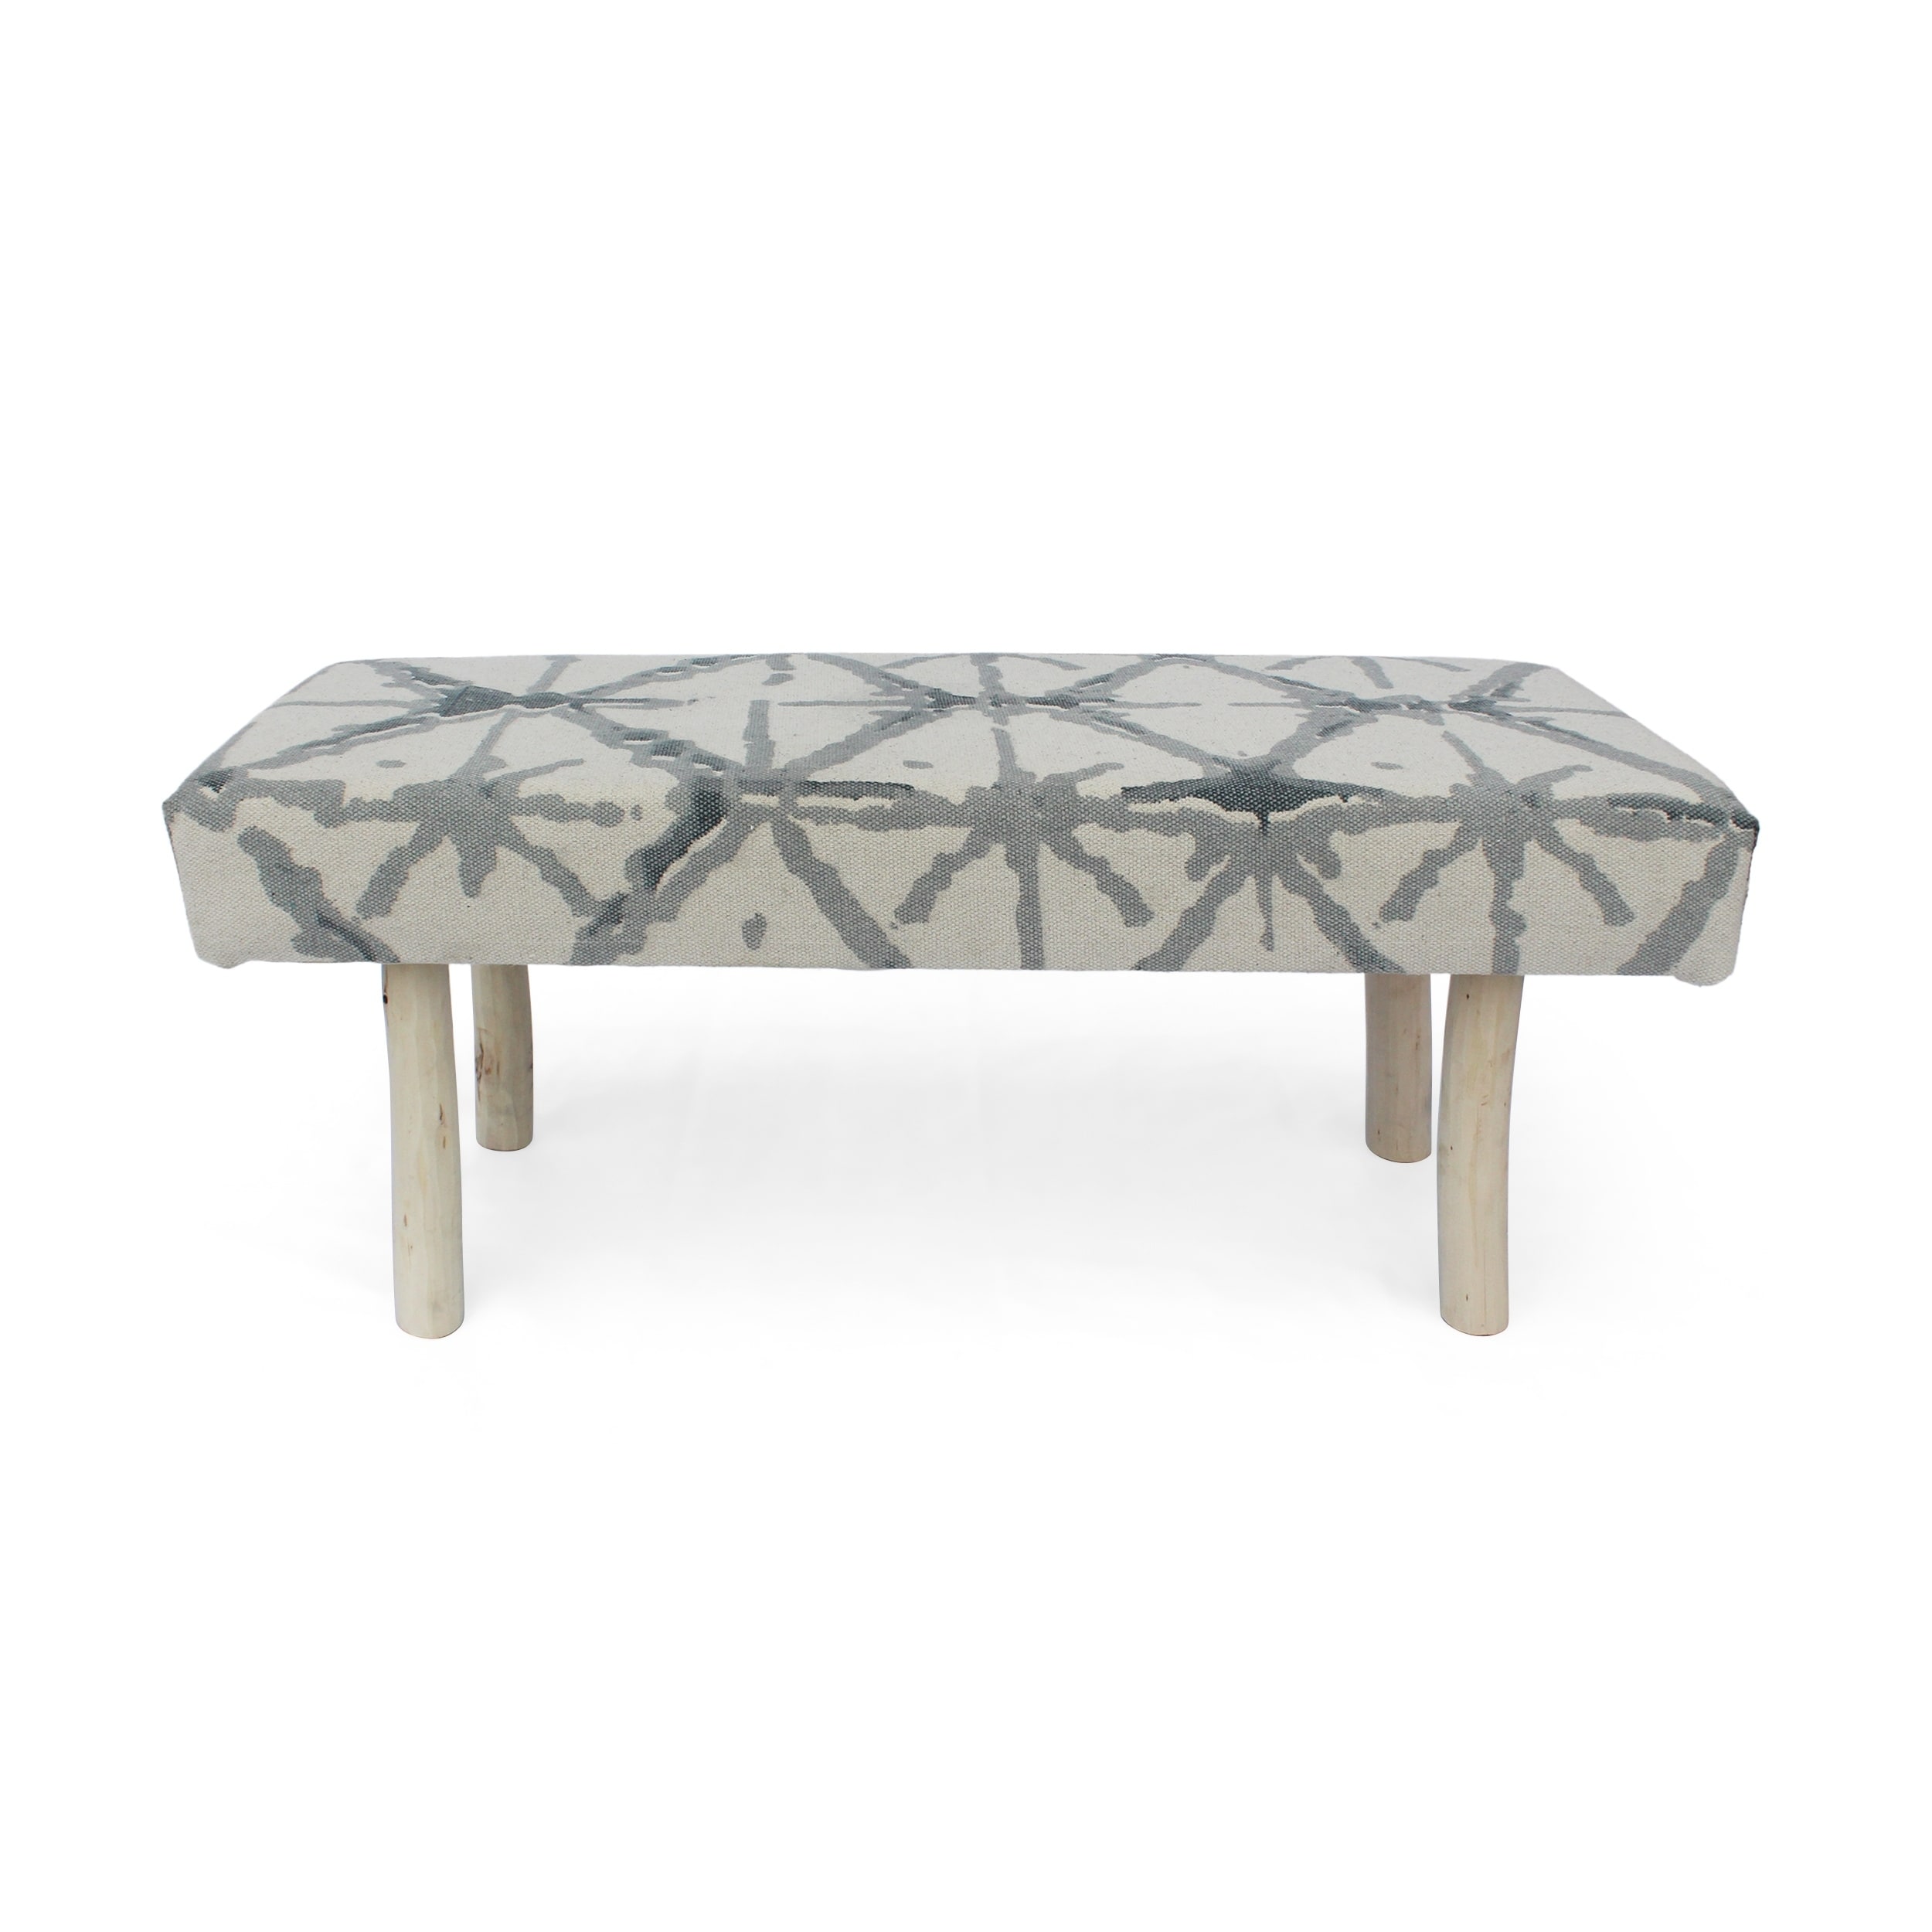 Laveta Handcrafted Boho Cotton Rectangular Bench by Christopher Knight Home